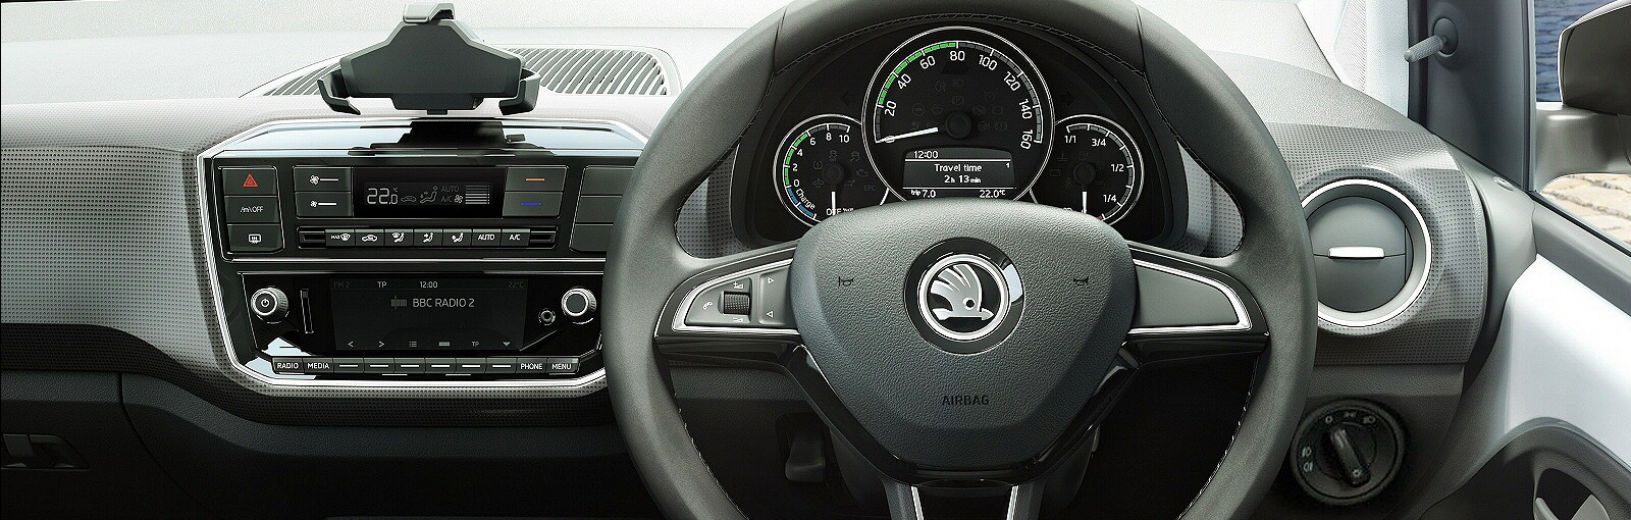 Skoda warning lights – what they mean and what you need to do